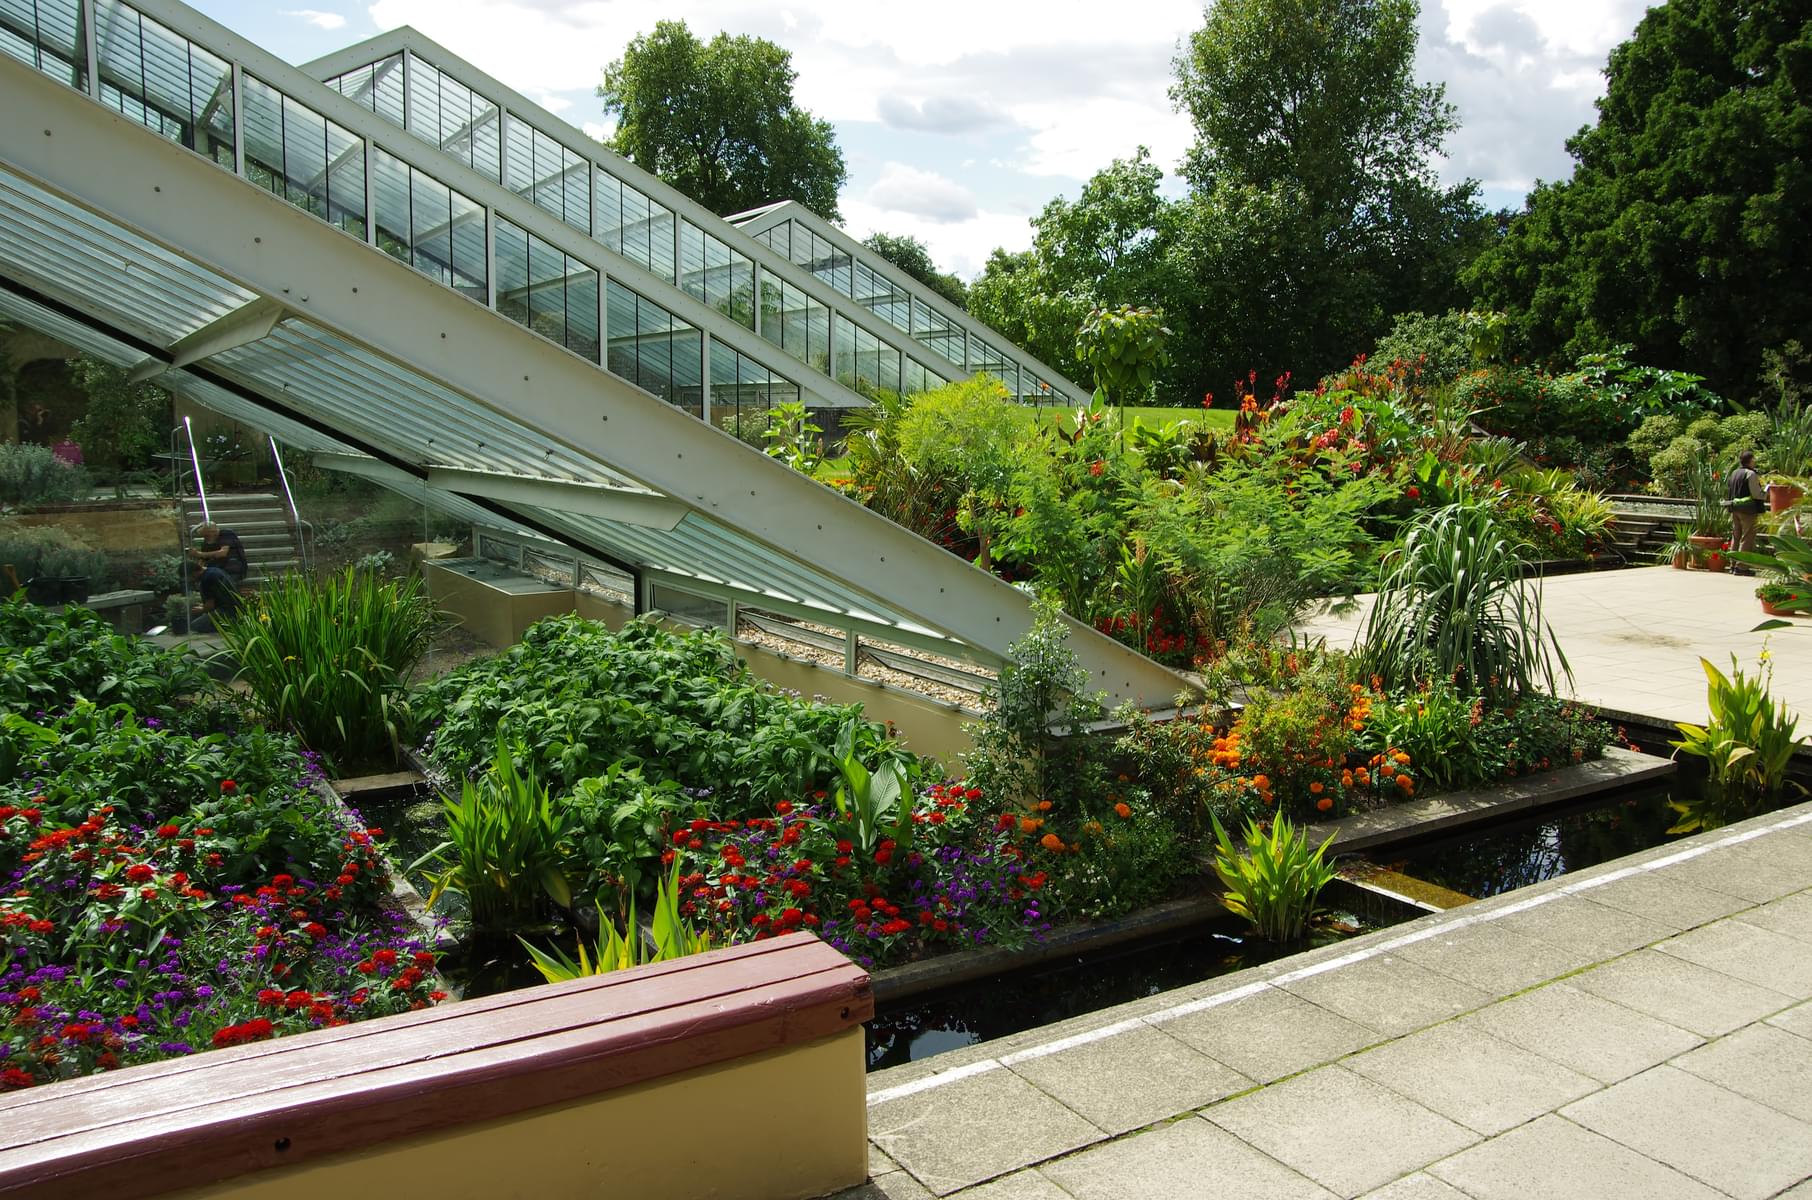 Explore The Princess of Wales Conservatory